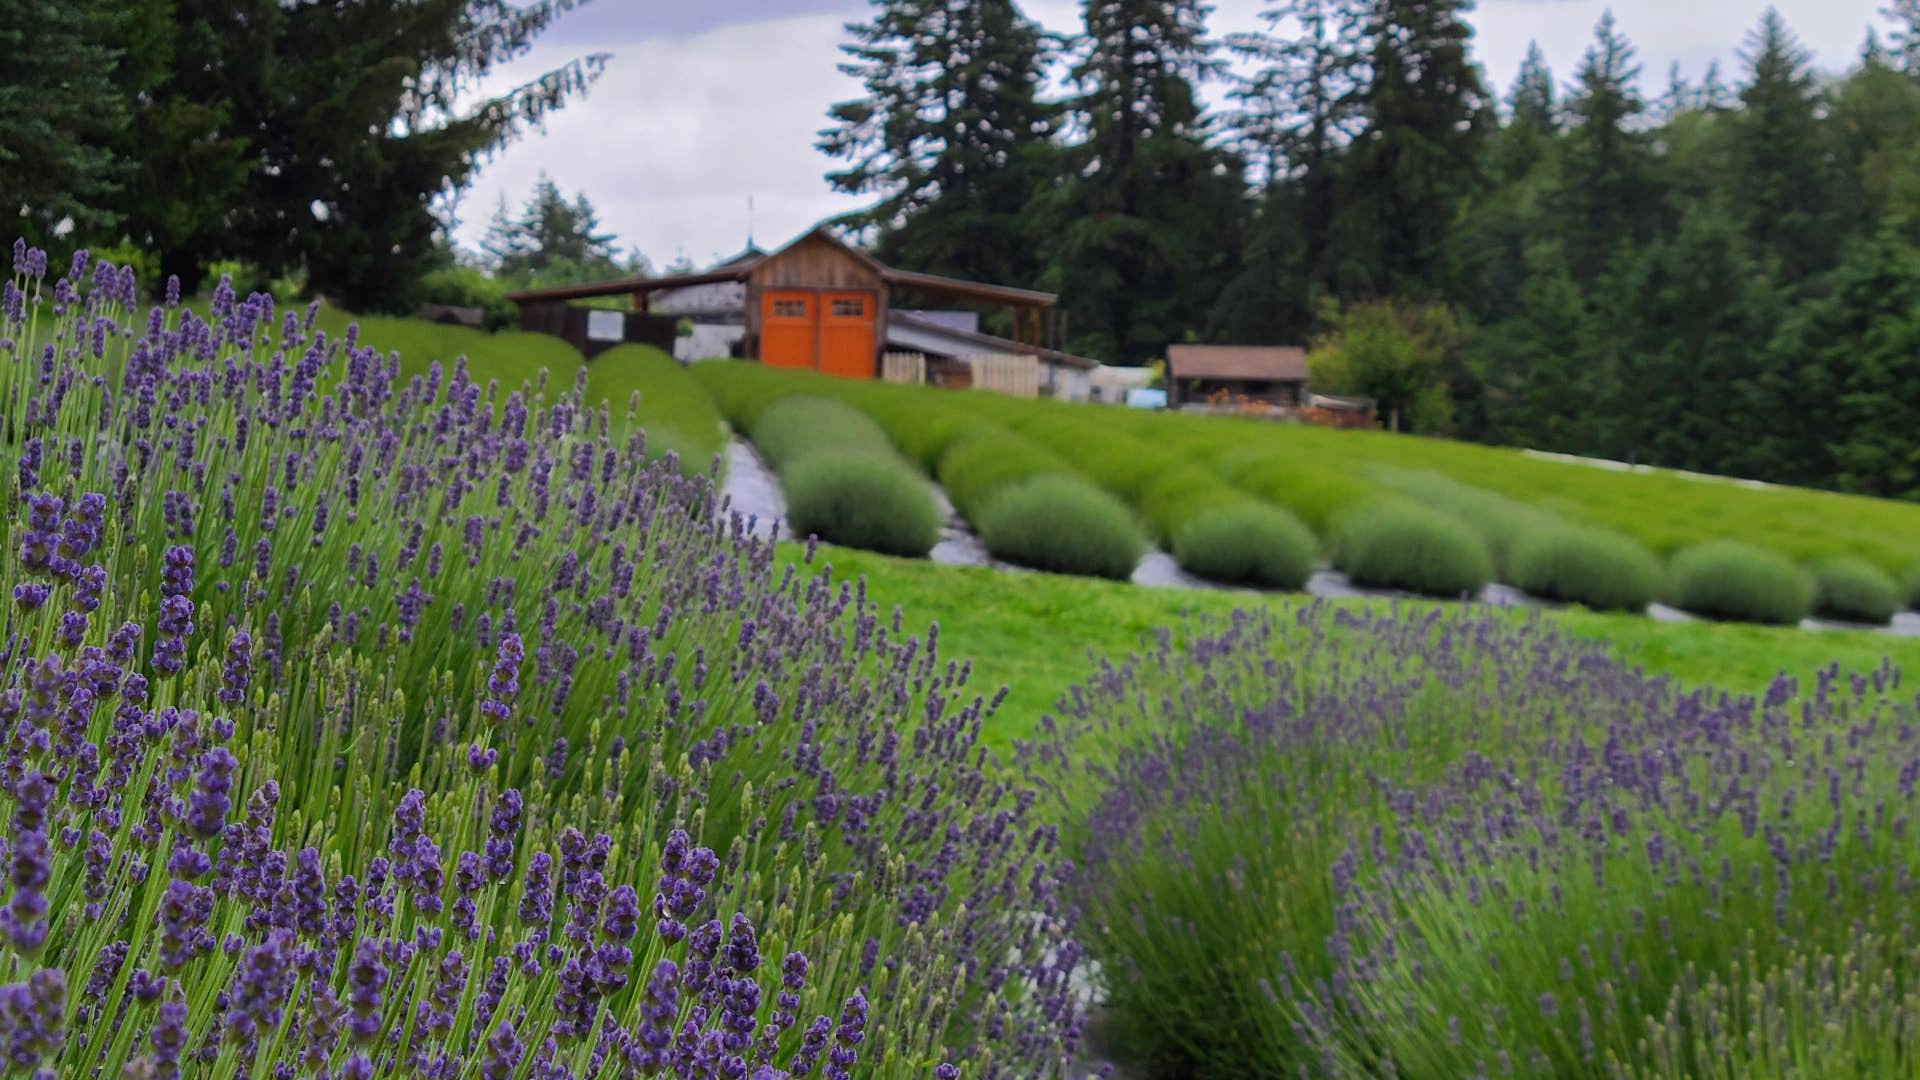 Close up view of lavender bushes with other green bushes and buildings in the background